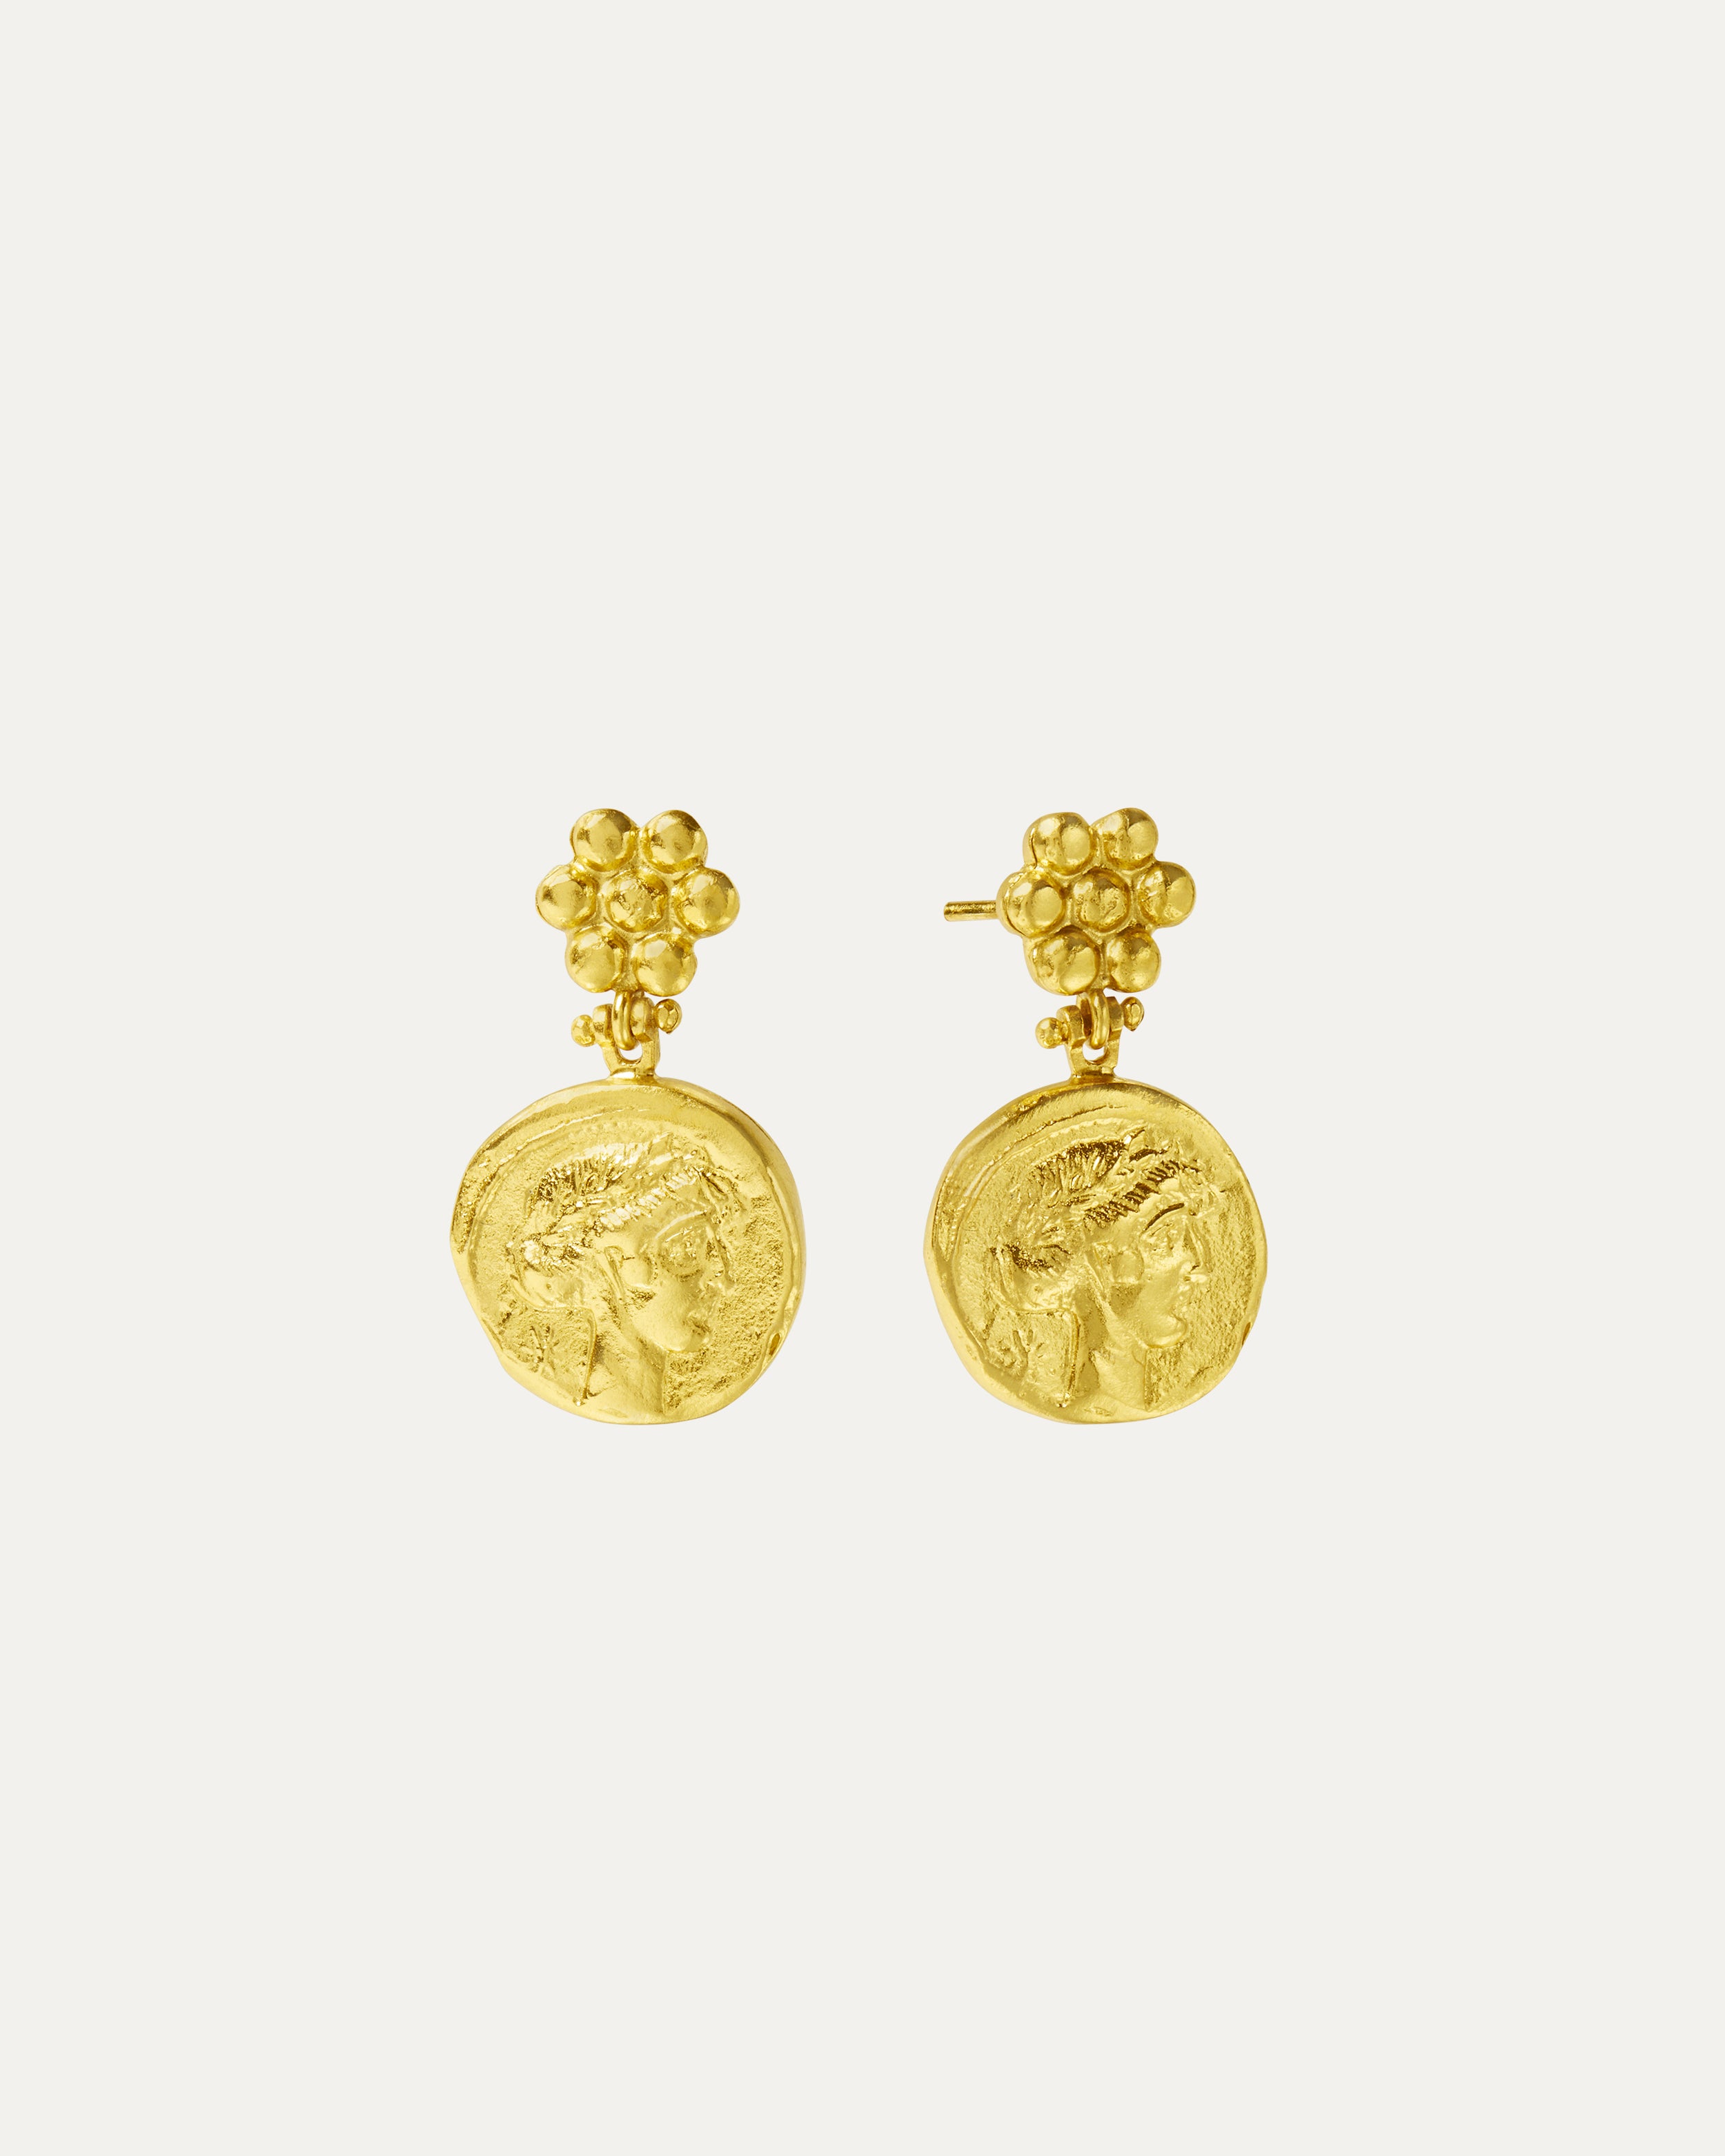 Goddess Demeter Coin Stud Earrings | Sustainable Jewellery by Ottoman Hands